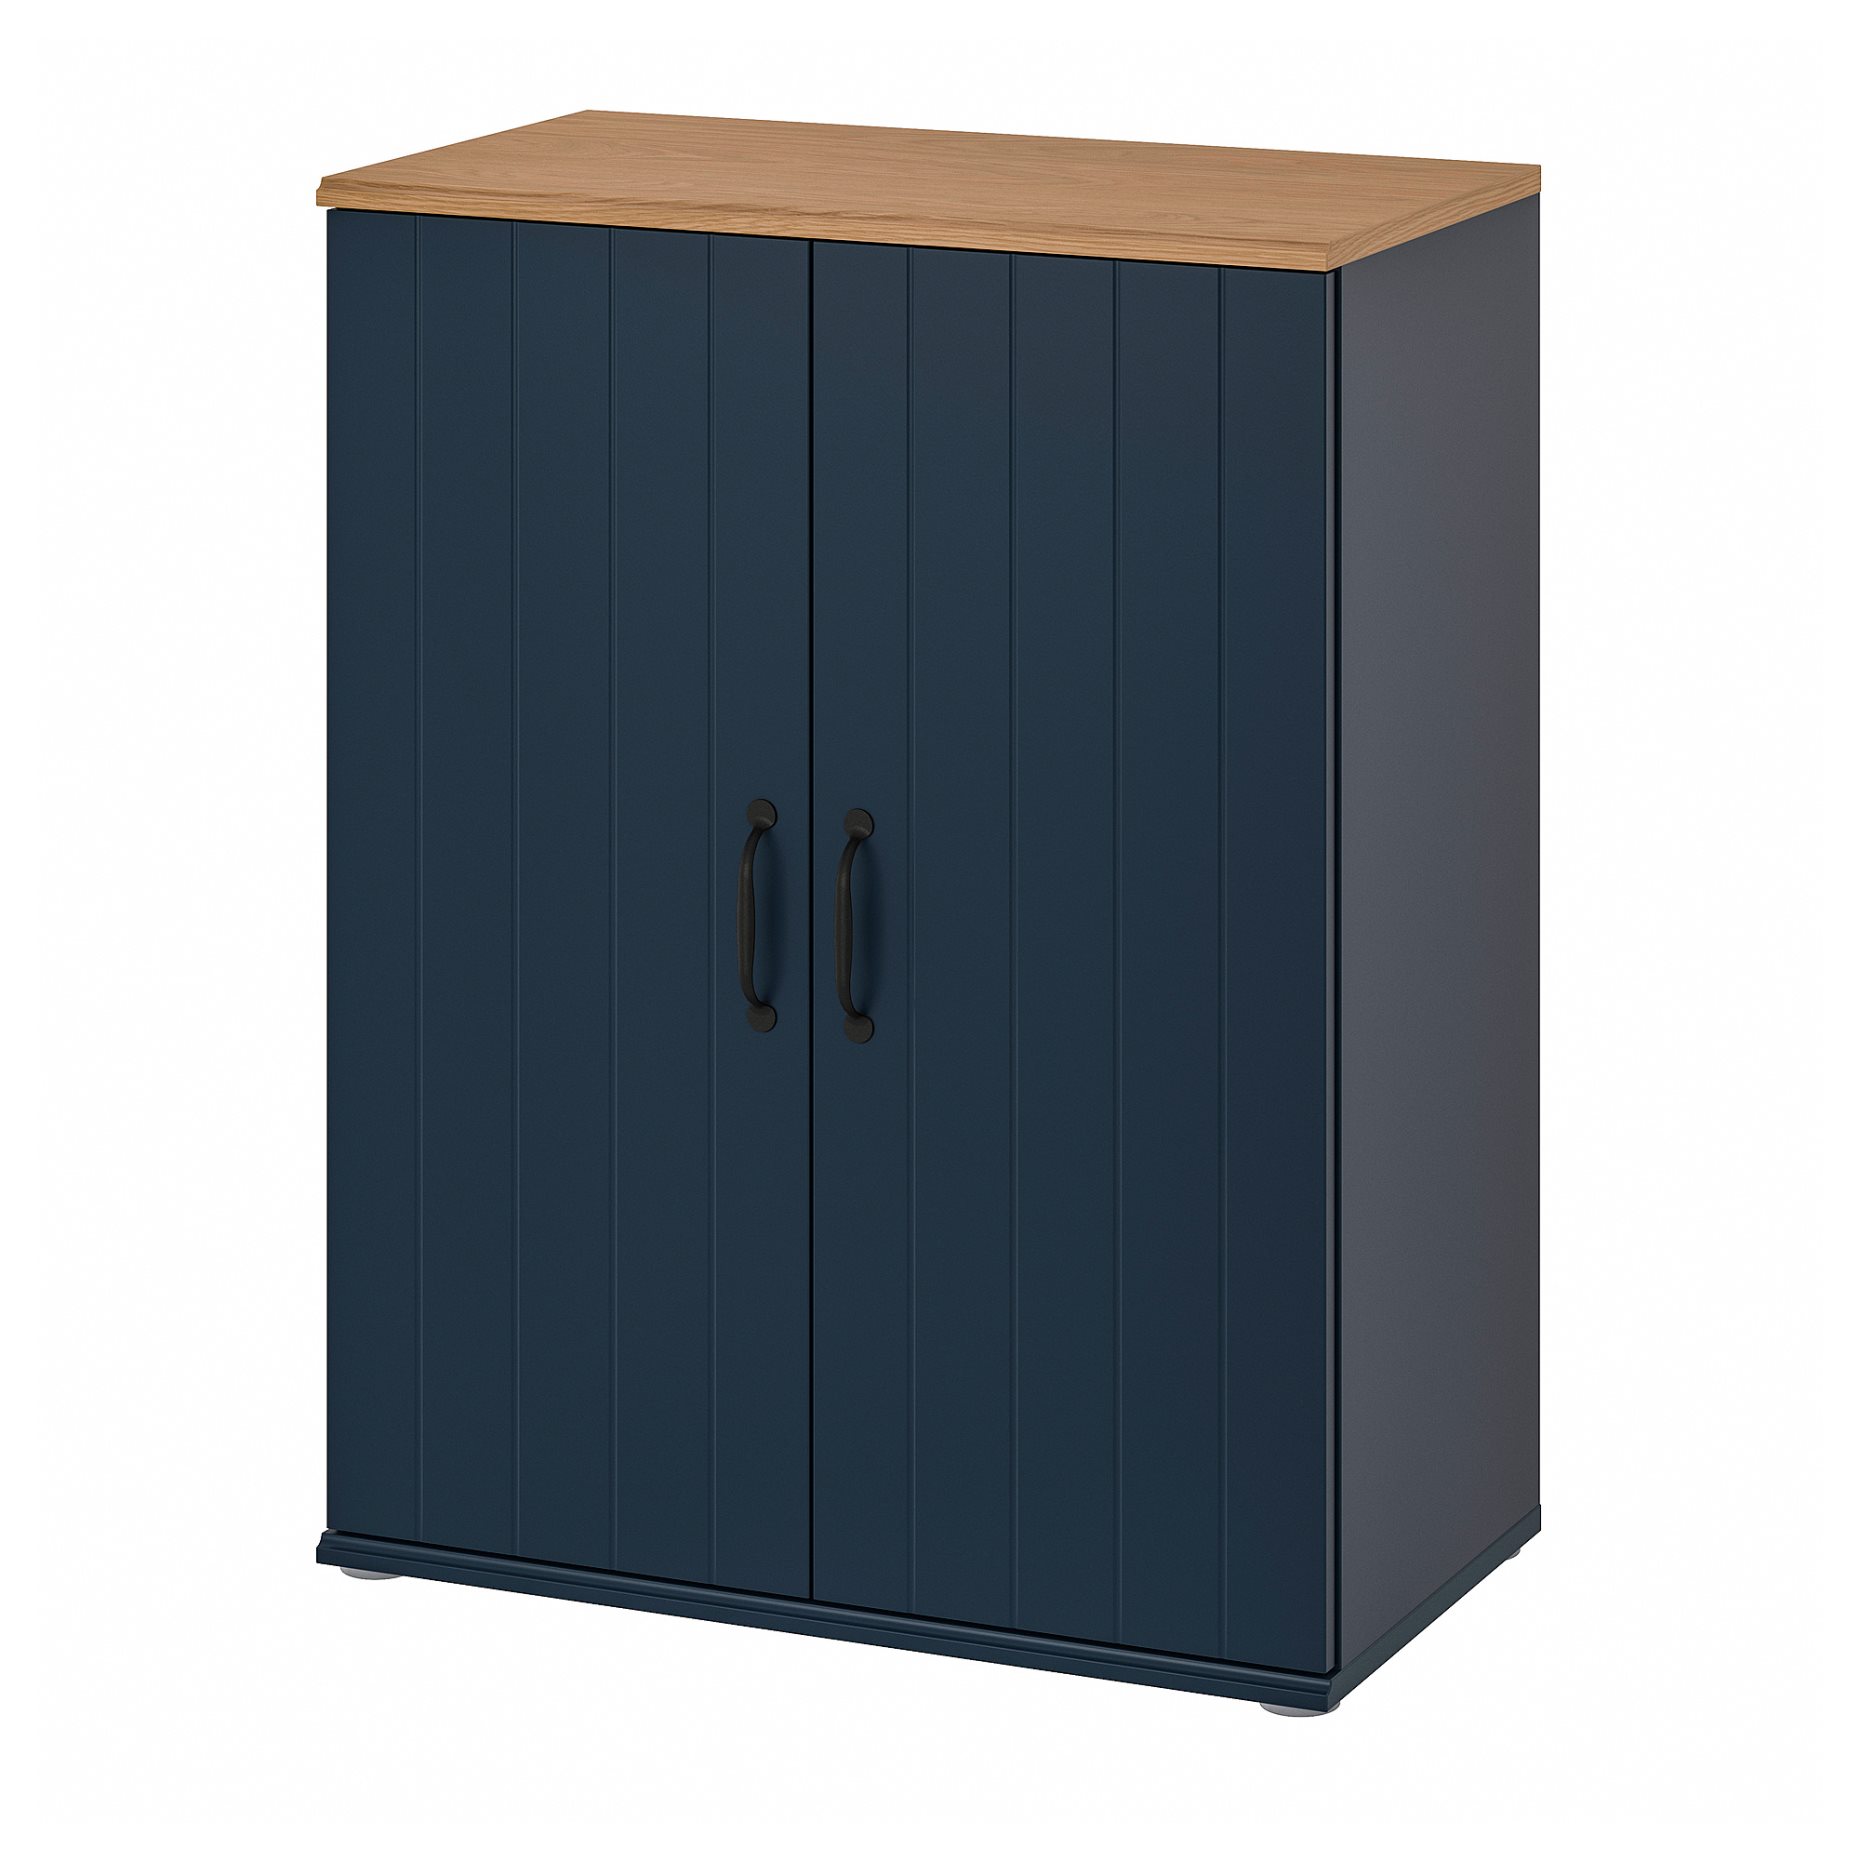 SKRUVBY, cabinet with doors, 70x90 cm, 305.203.58